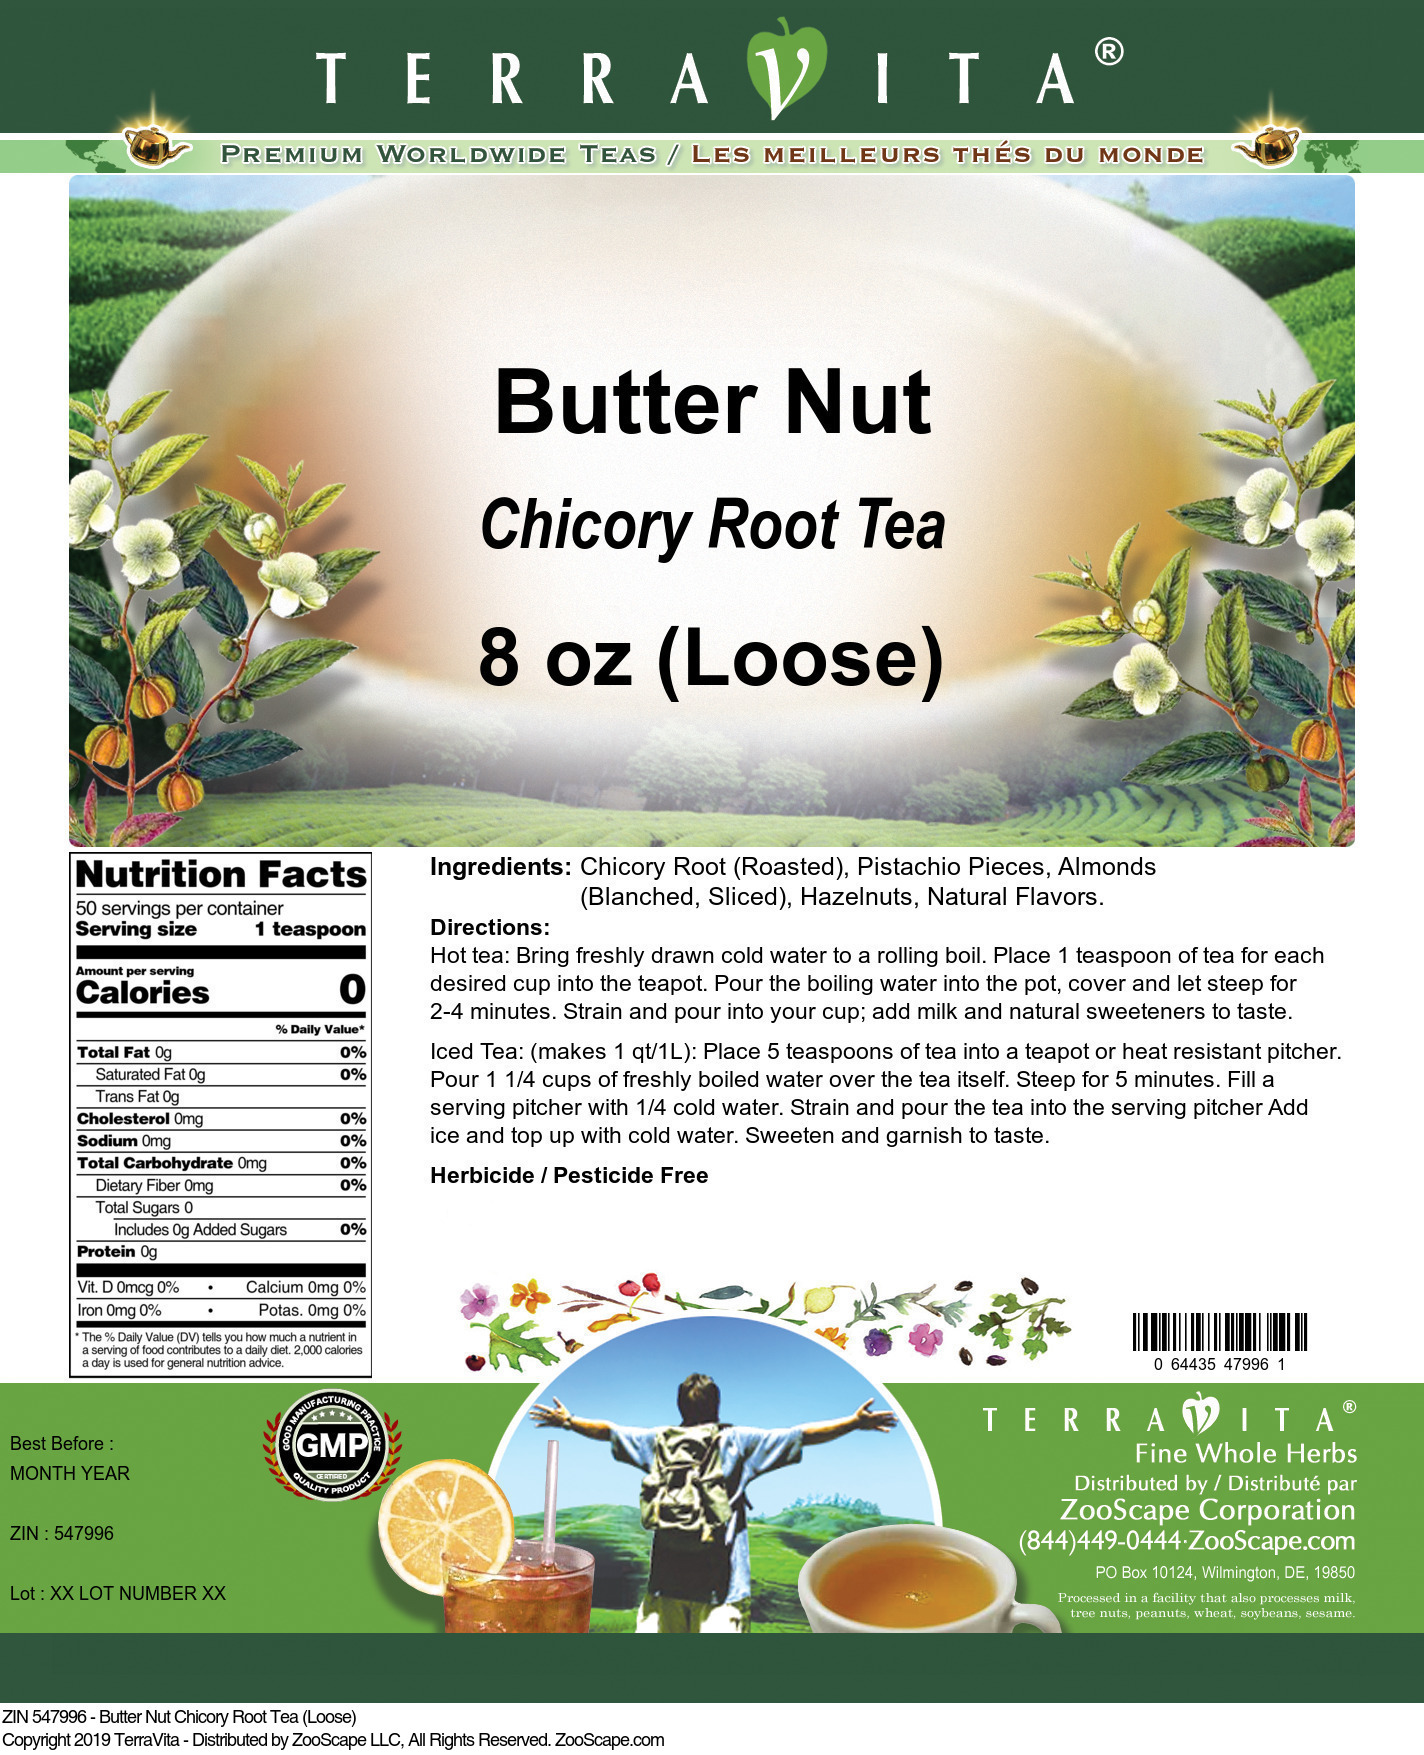 Butter Nut Chicory Root Tea (Loose) - Label